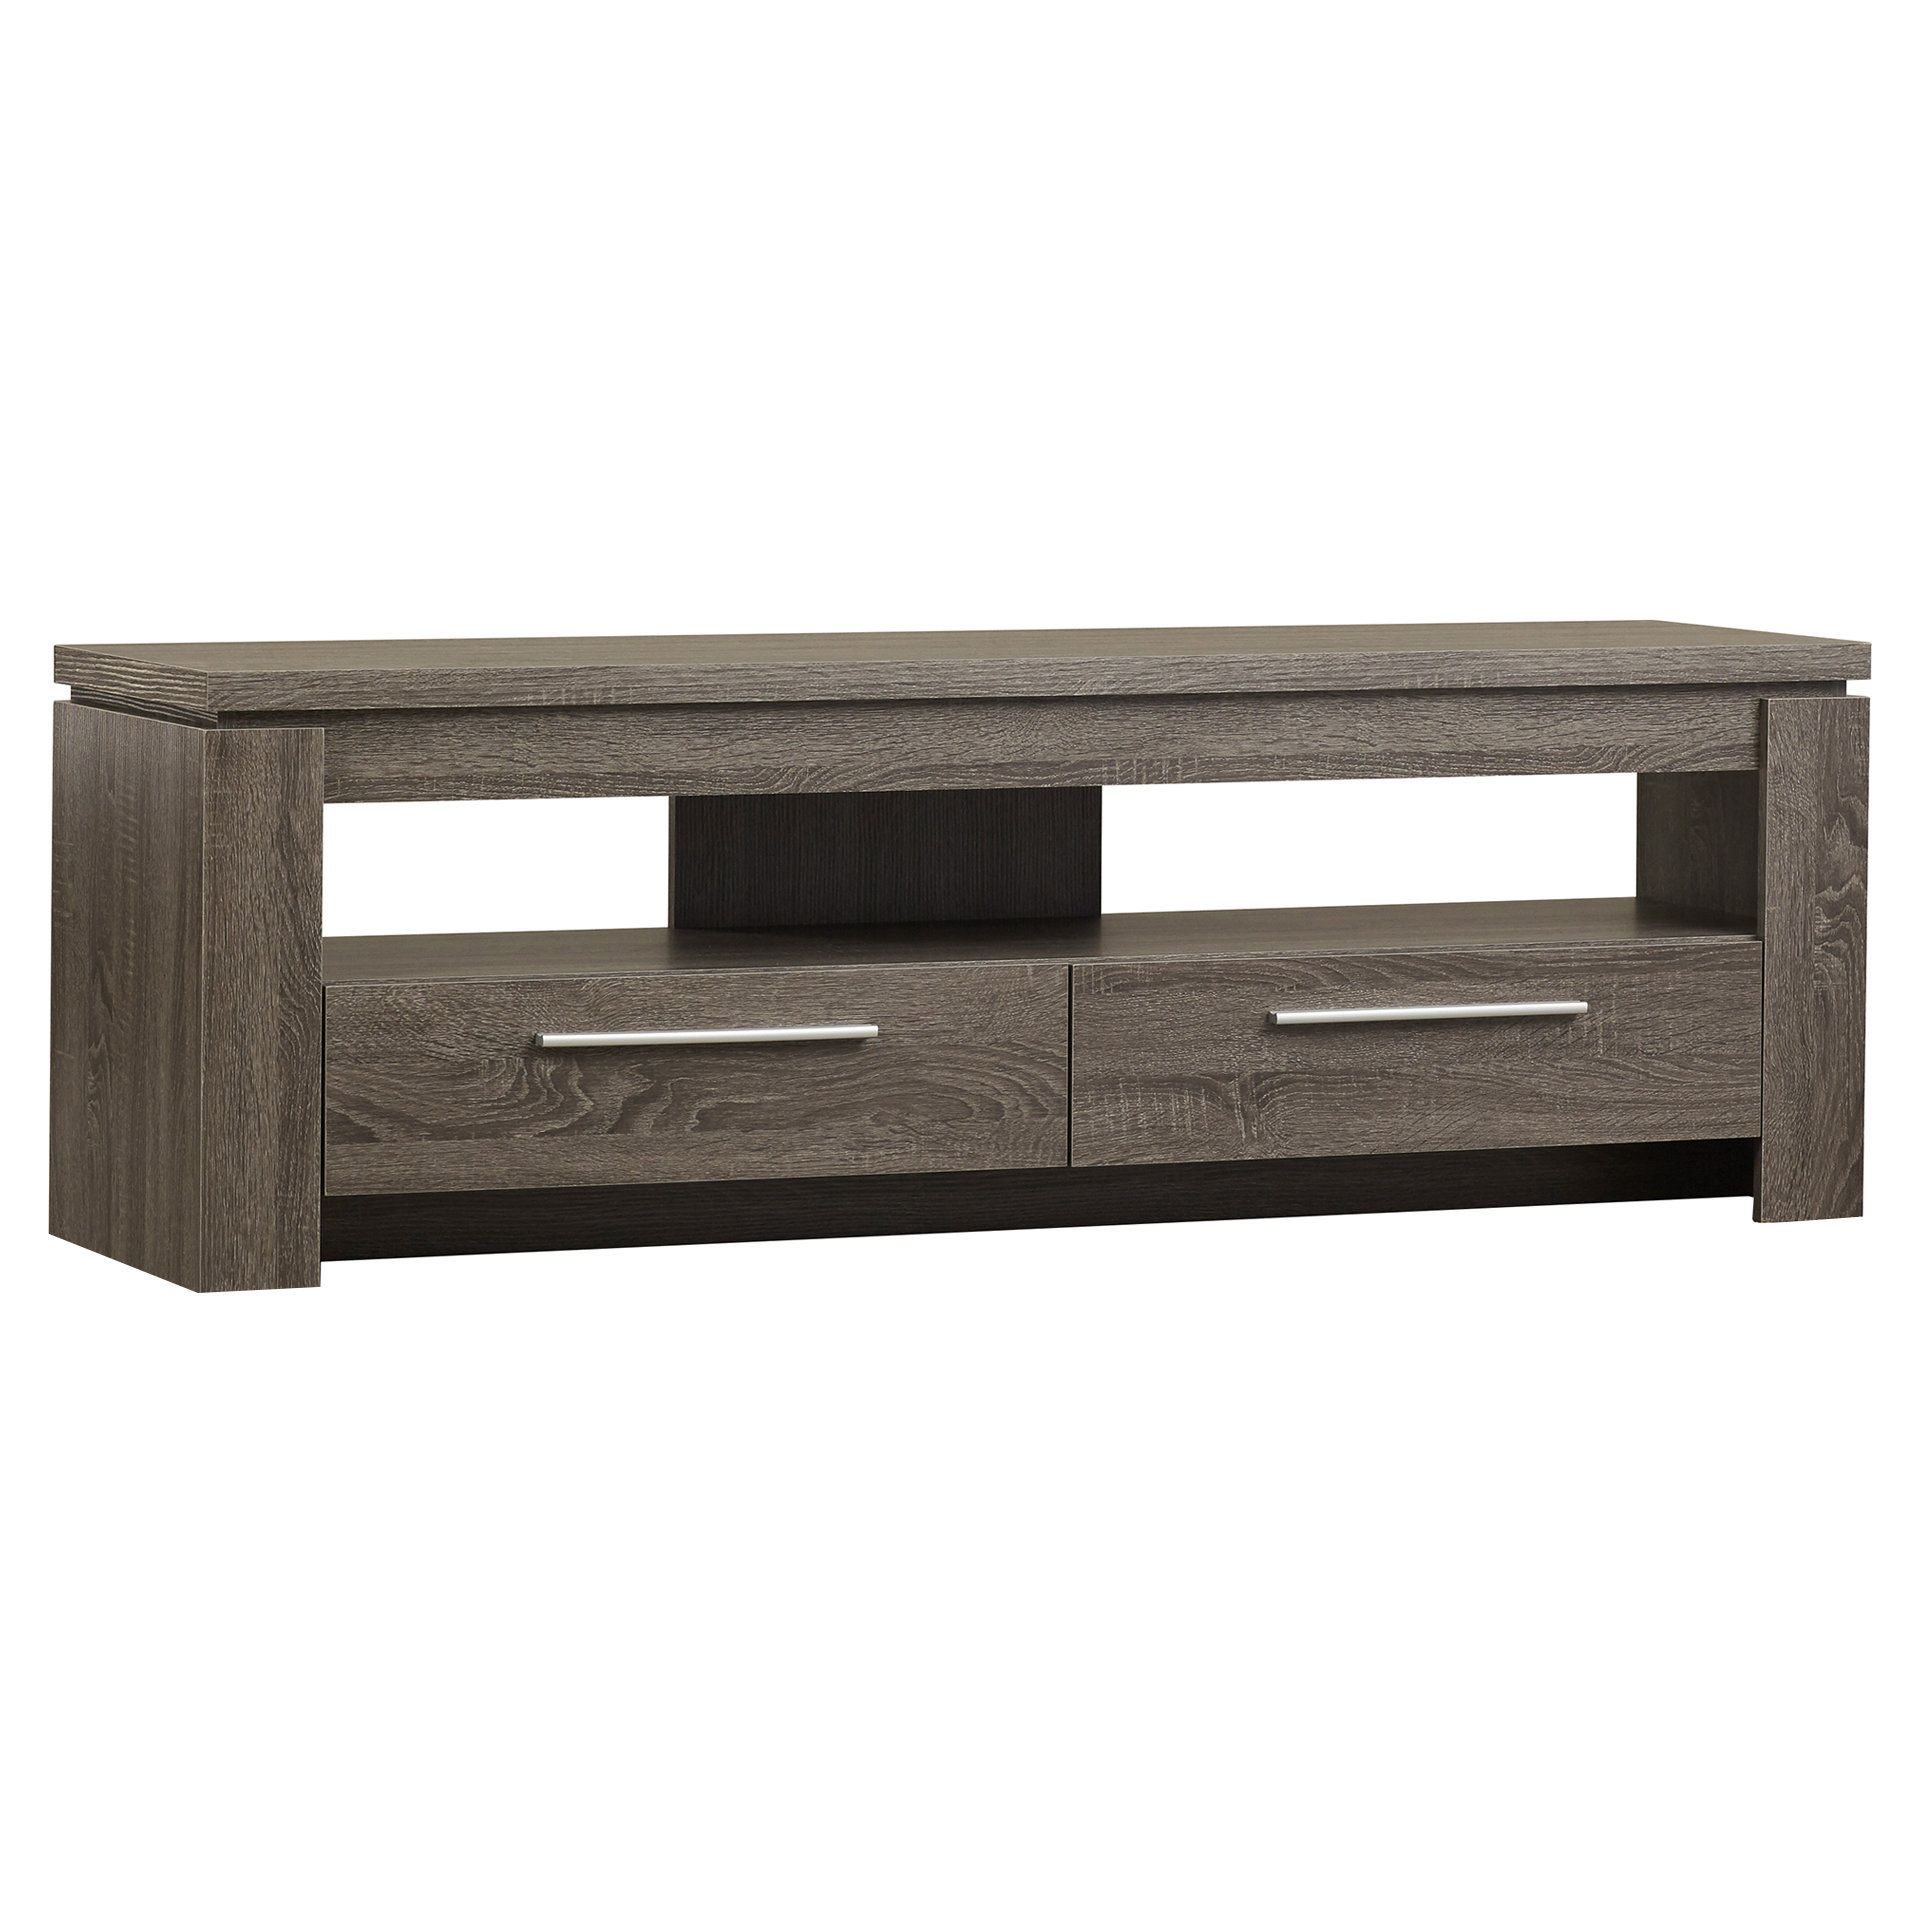 Allmodern For Favorite Lauderdale 74 Inch Tv Stands (View 6 of 20)